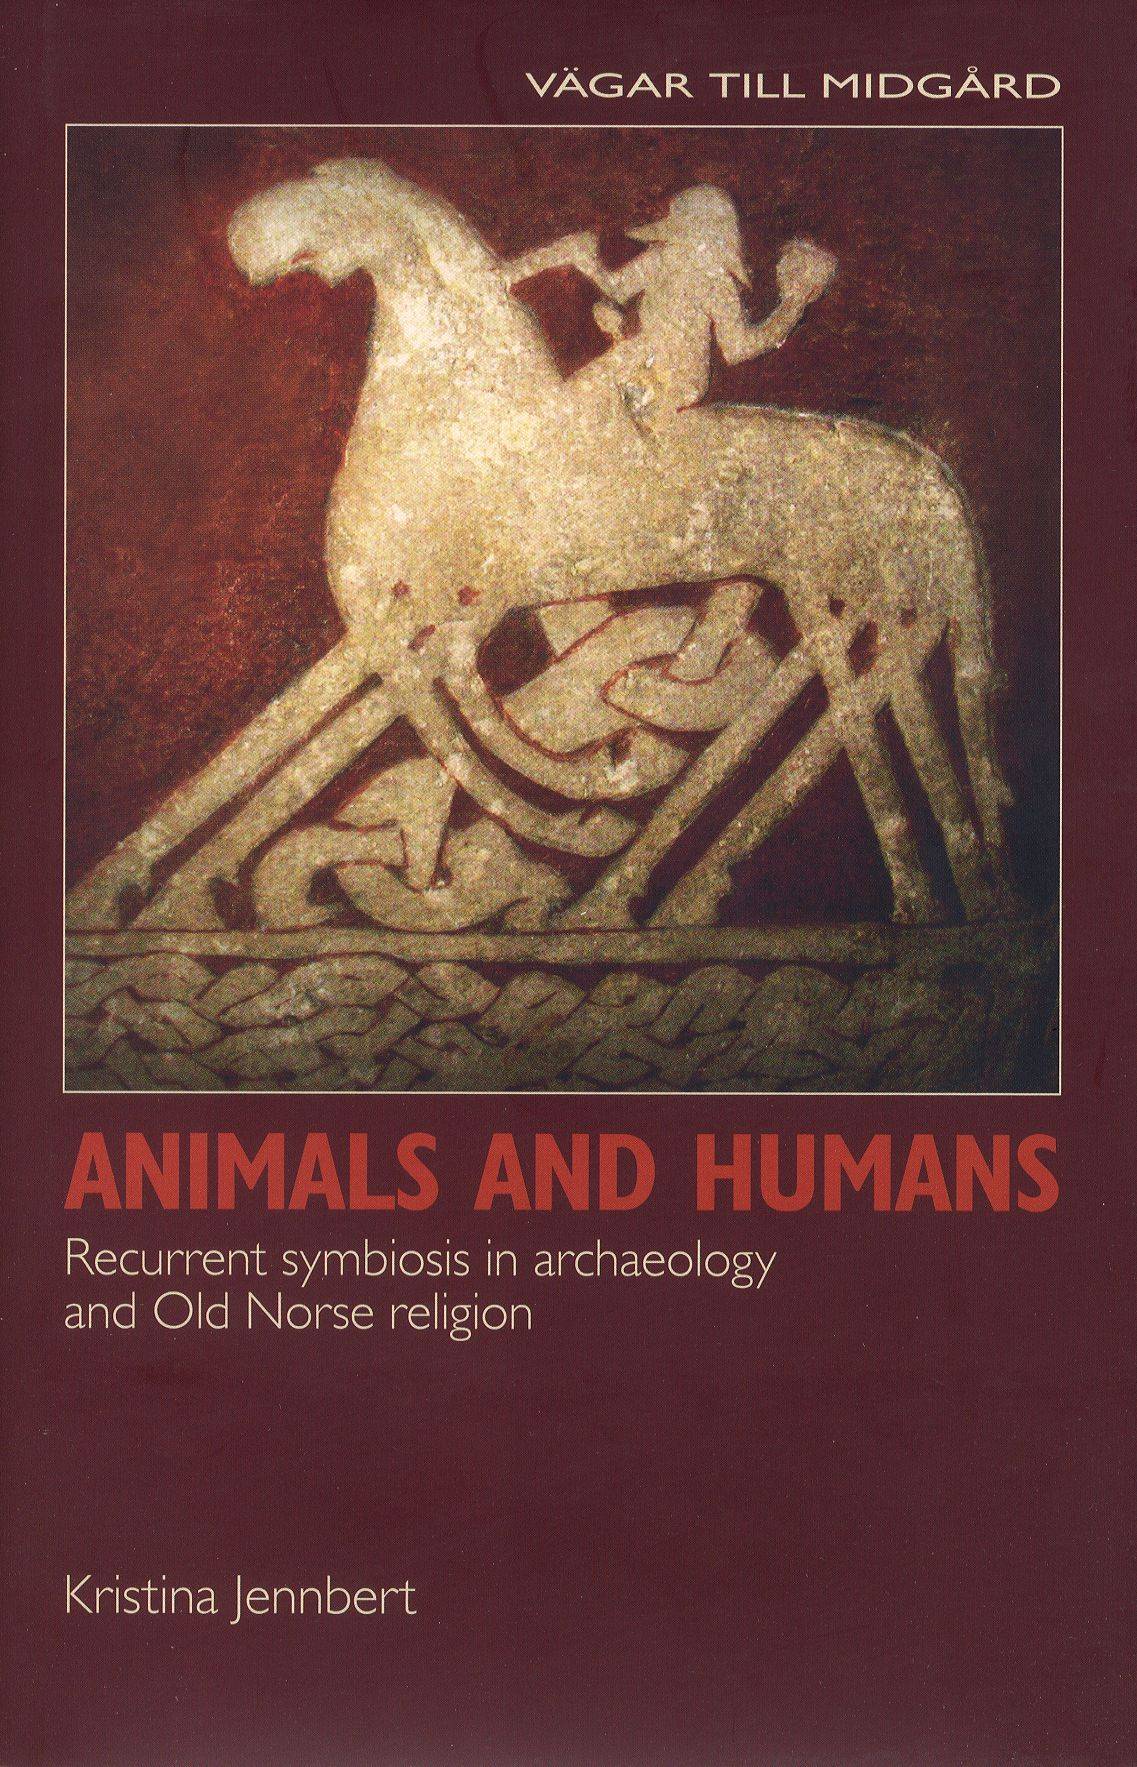 Animals and humans : recurrent symbiosis in archaelogy and old norse religion